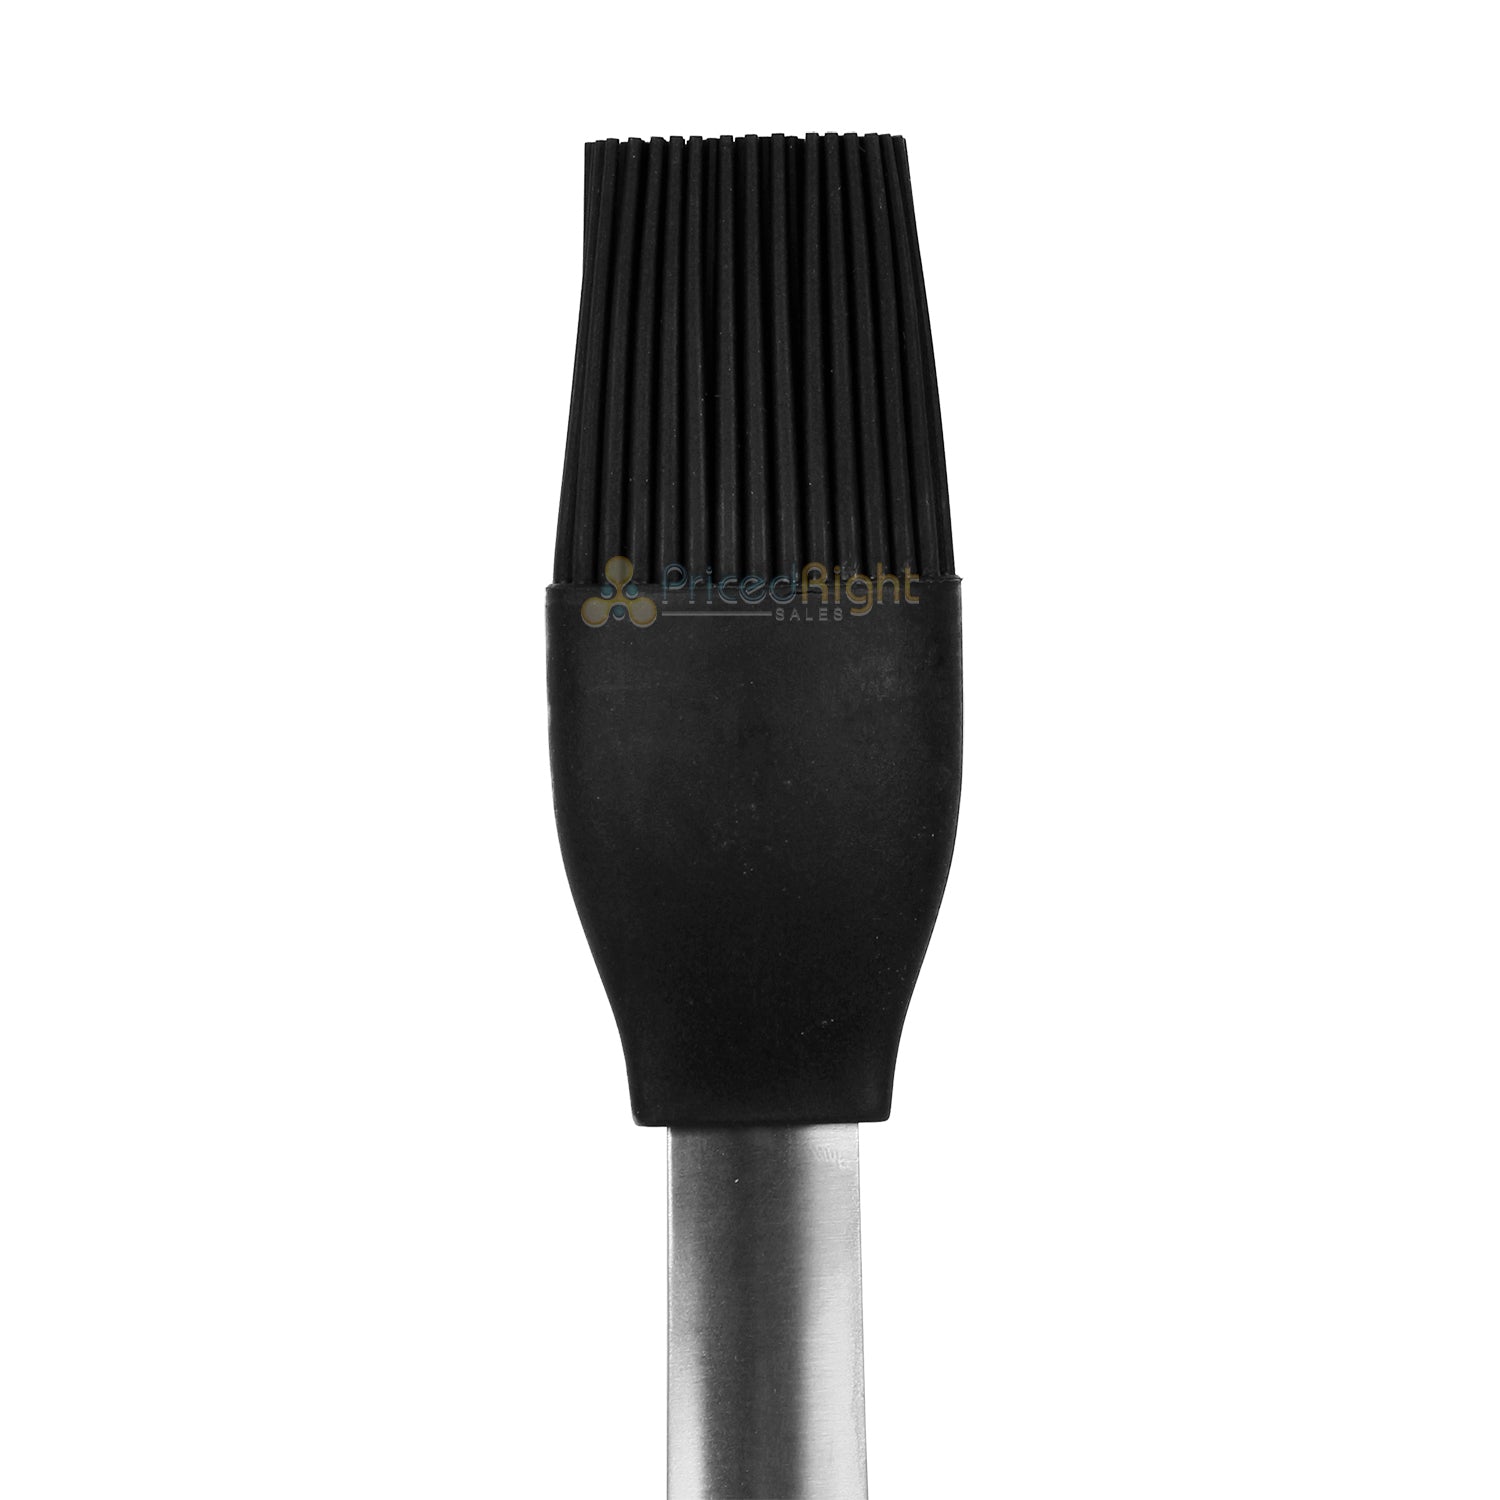 Mr Bar-B-Q Premium Basting Brush Silicone & Stainless Steel Rubber Grip 16 In